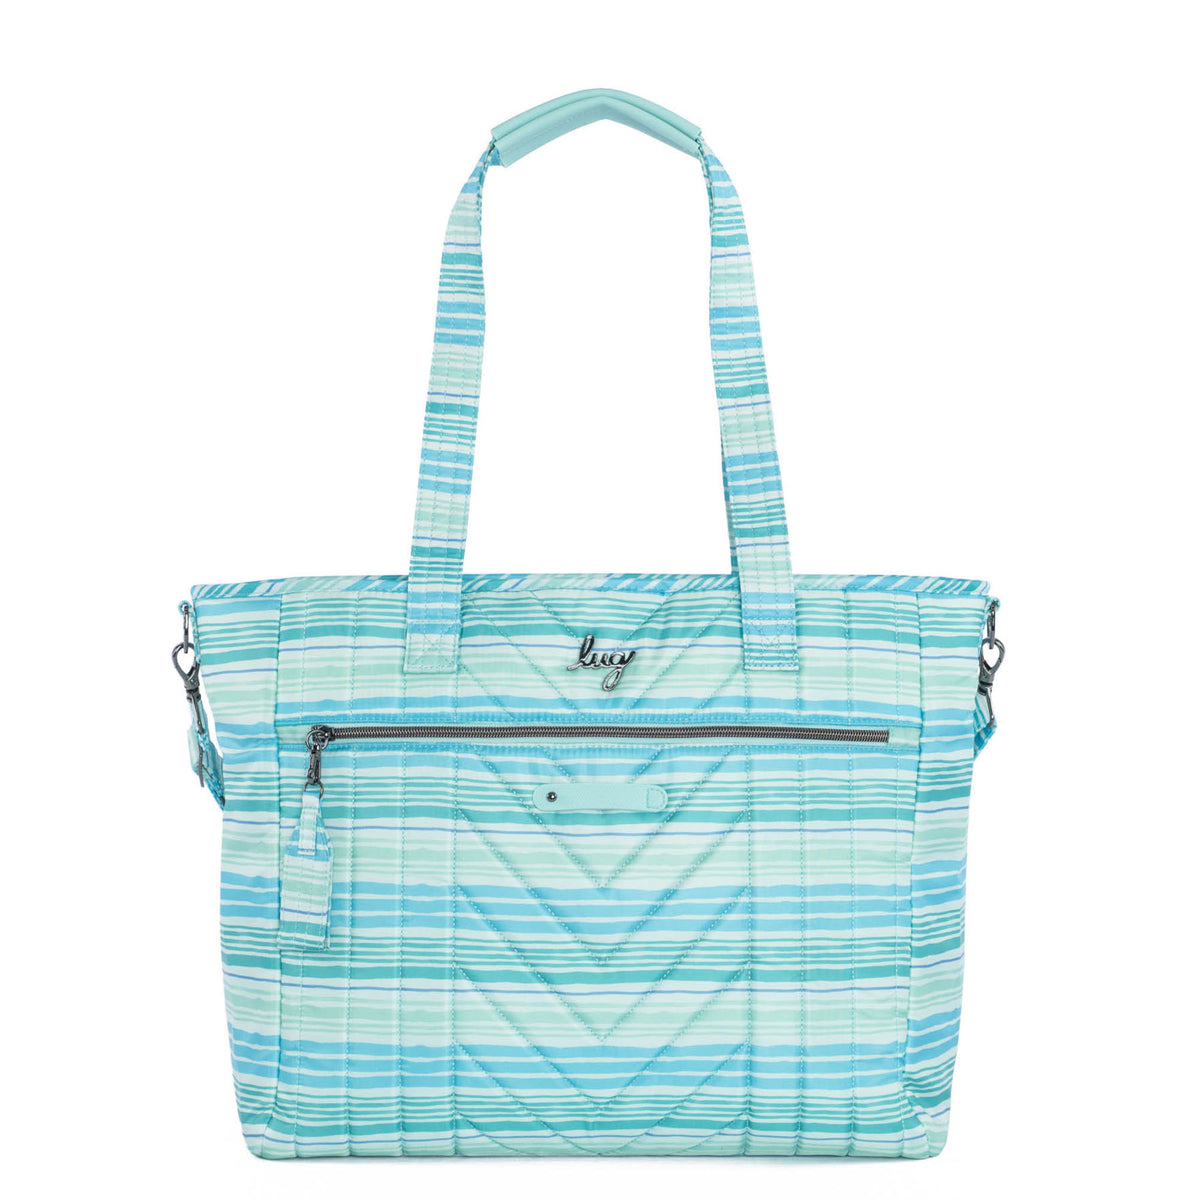 Paddle Carry-All Tote